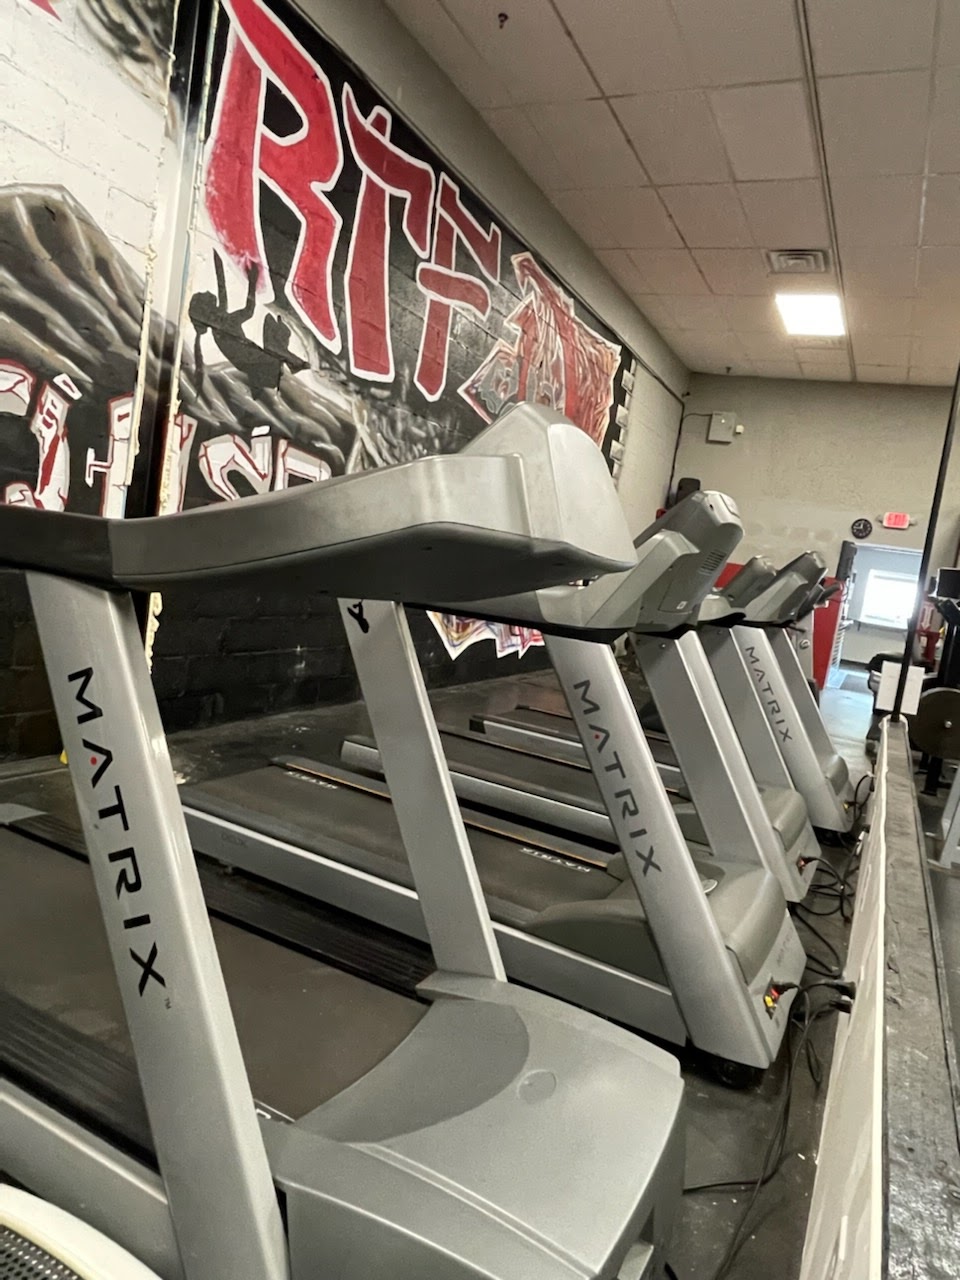 Real-Time Fitness | 5 Lenape Rd, Andover, NJ 07821 | Phone: (973) 786-7818